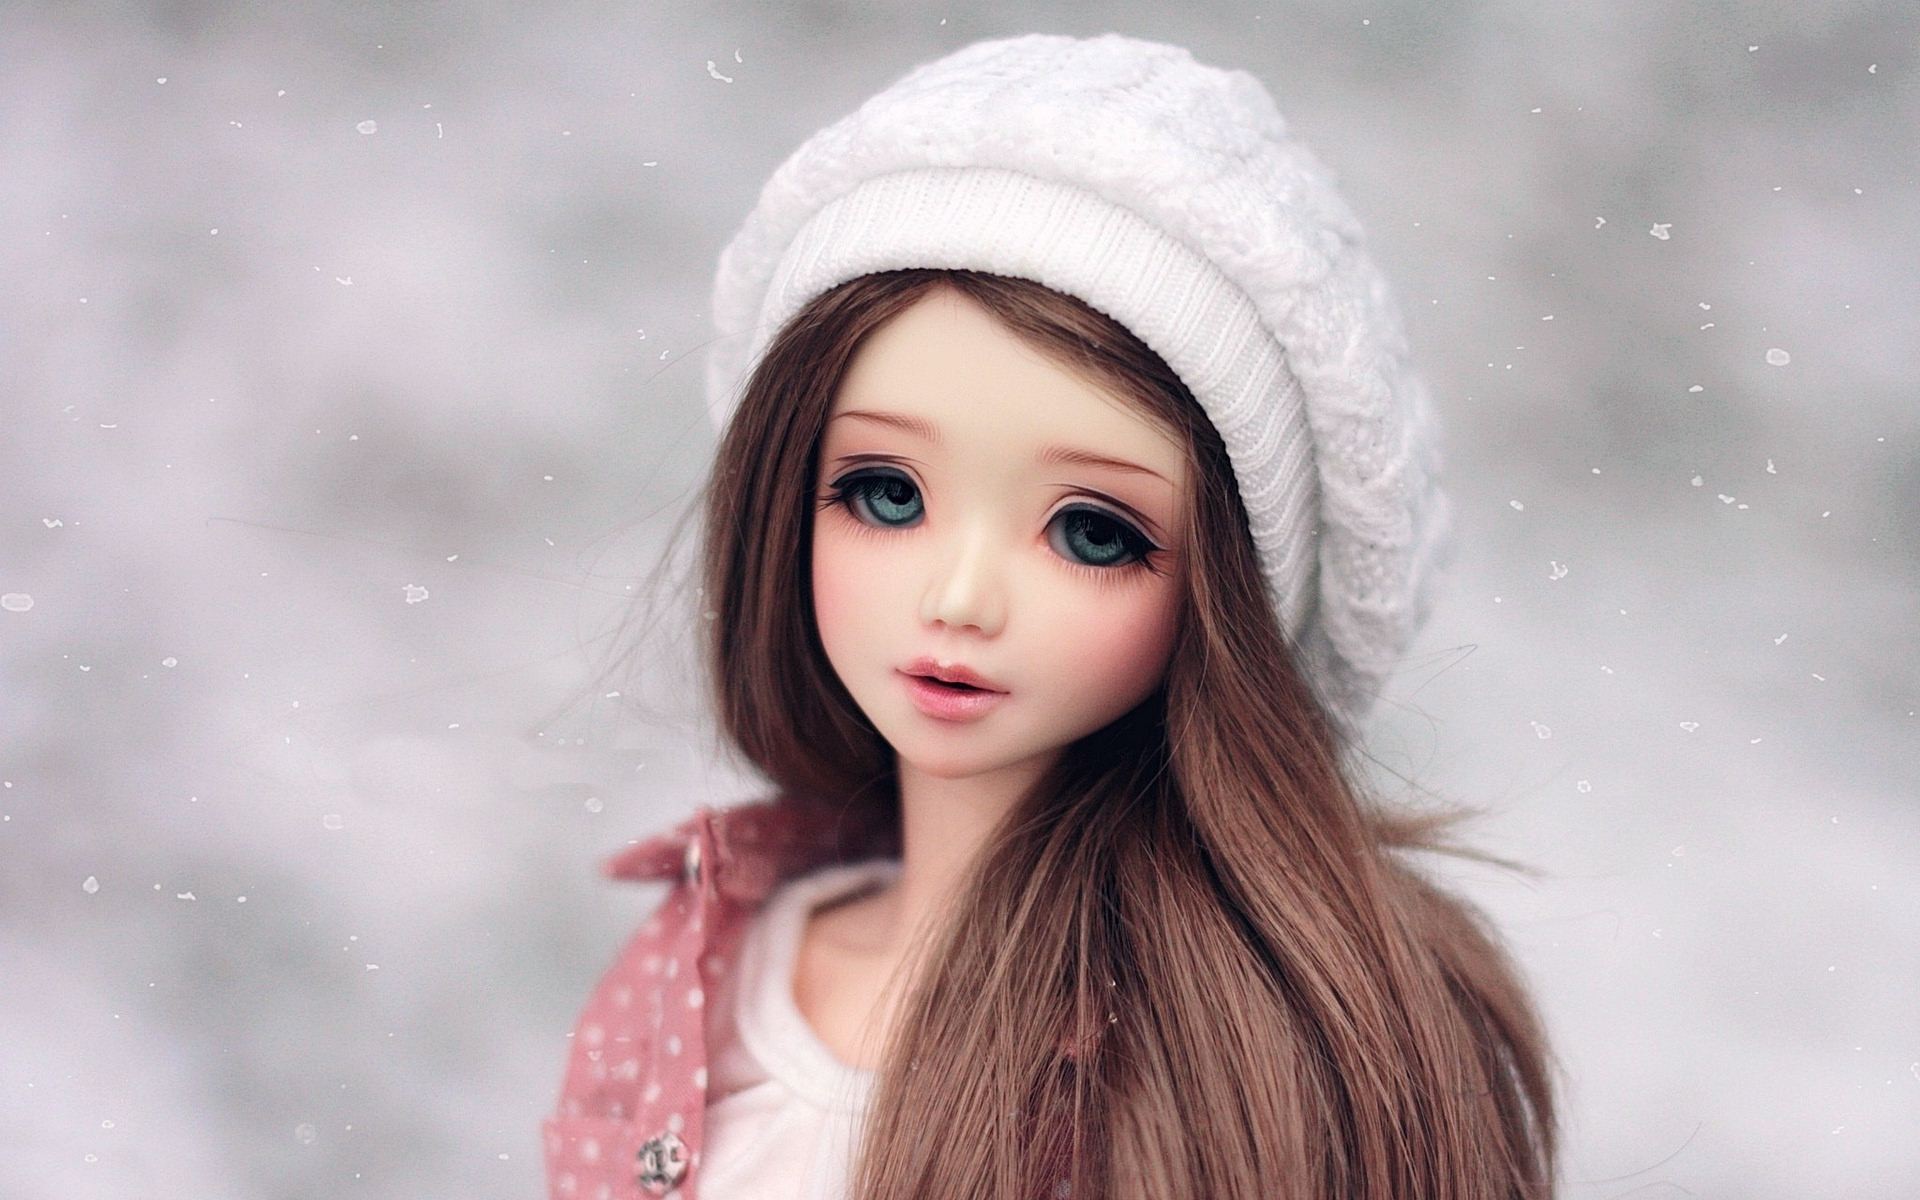 Toy Cap Doll Live Wallpaper - free download